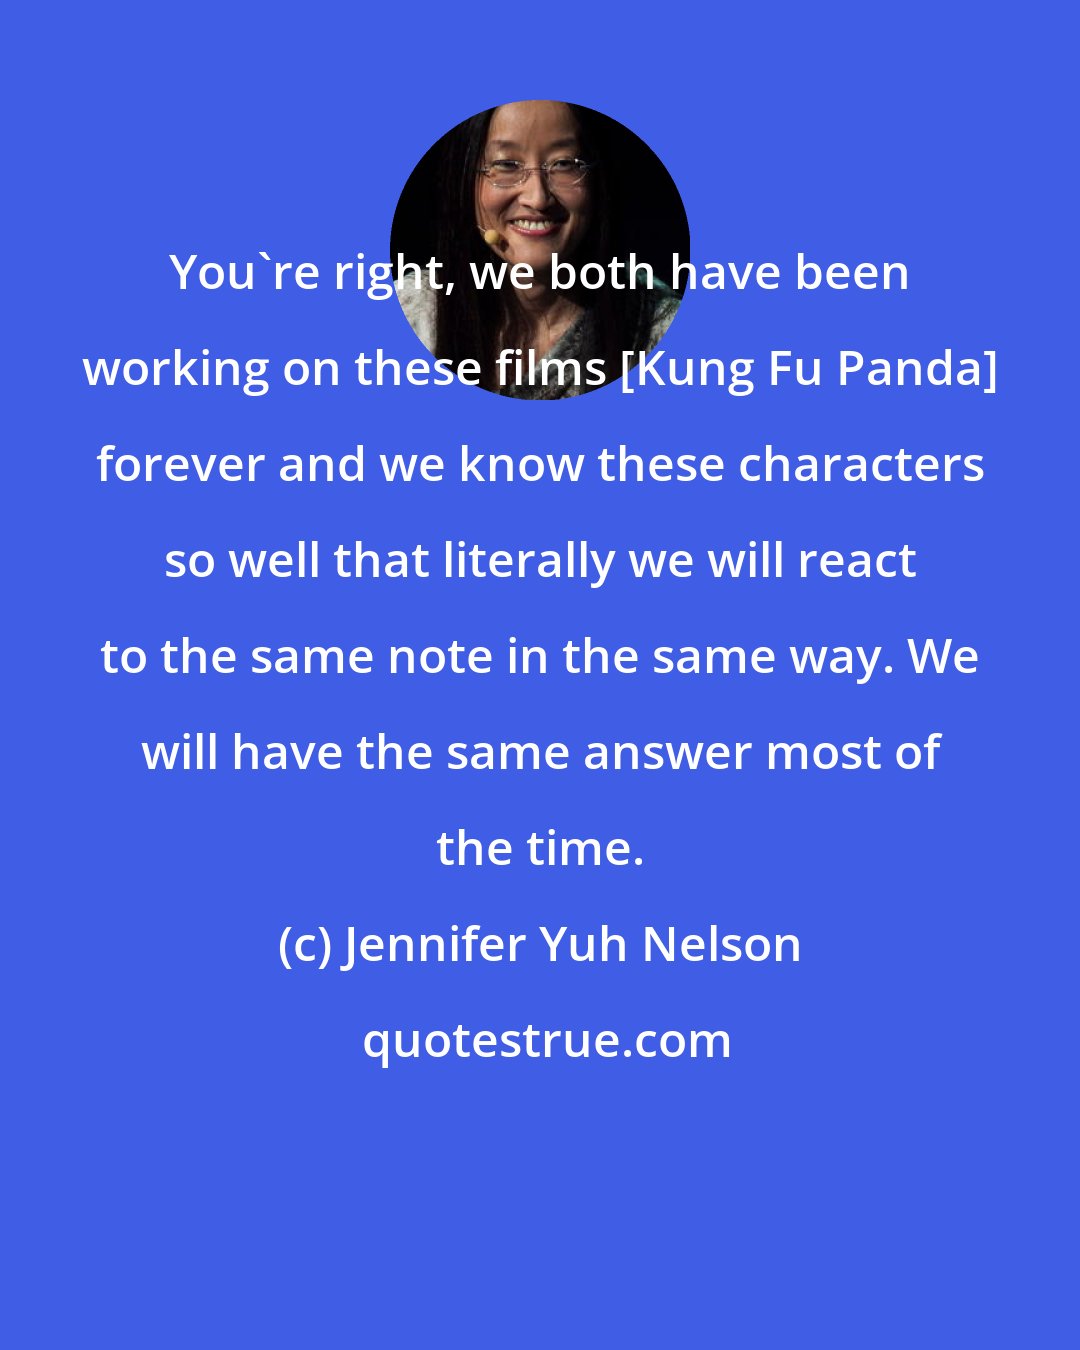 Jennifer Yuh Nelson: You're right, we both have been working on these films [Kung Fu Panda] forever and we know these characters so well that literally we will react to the same note in the same way. We will have the same answer most of the time.